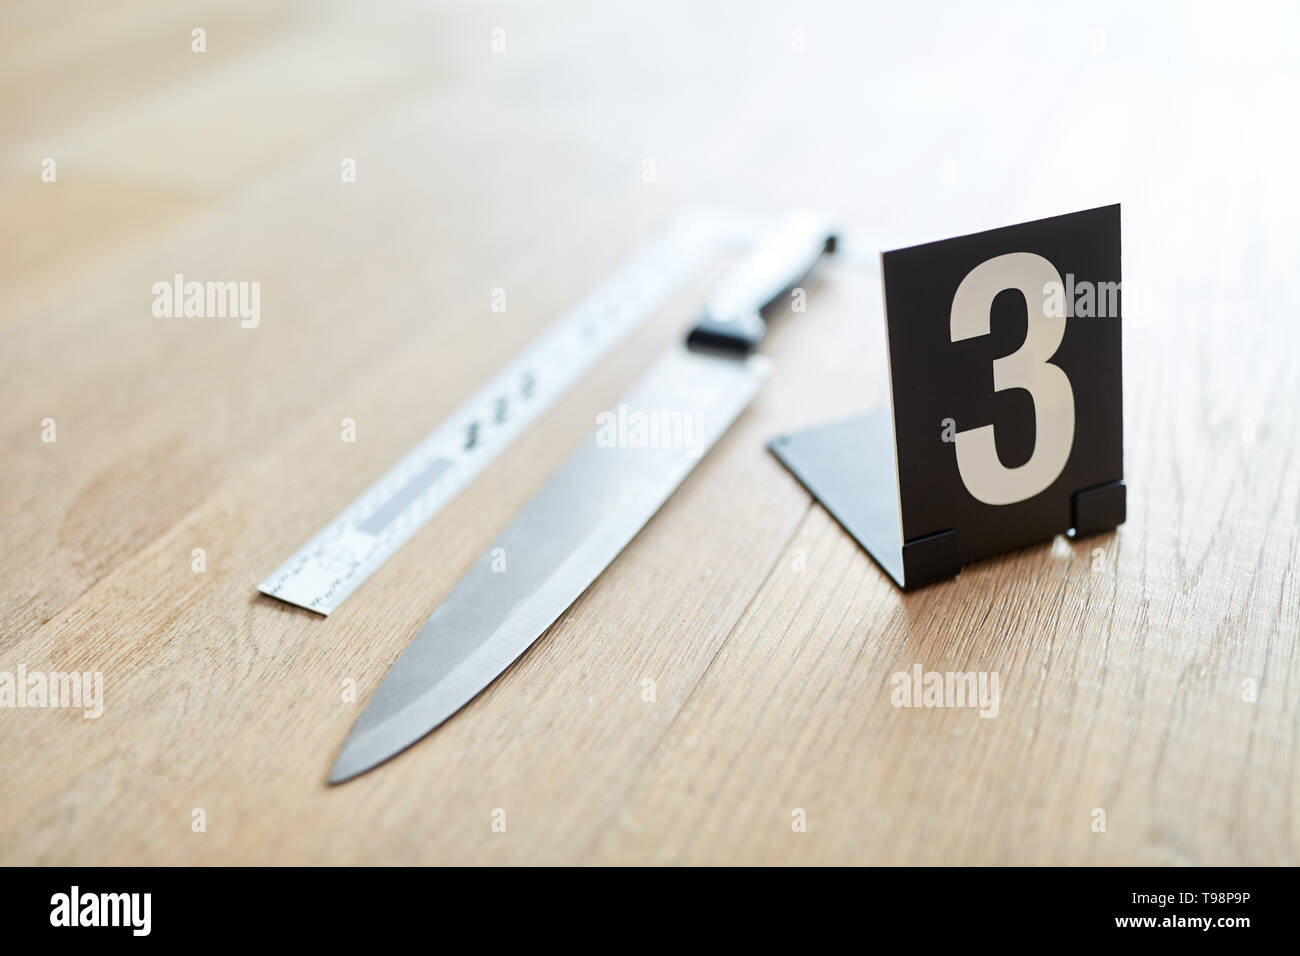 Knife with mark as evidence at the scene of a crime Stock Photo